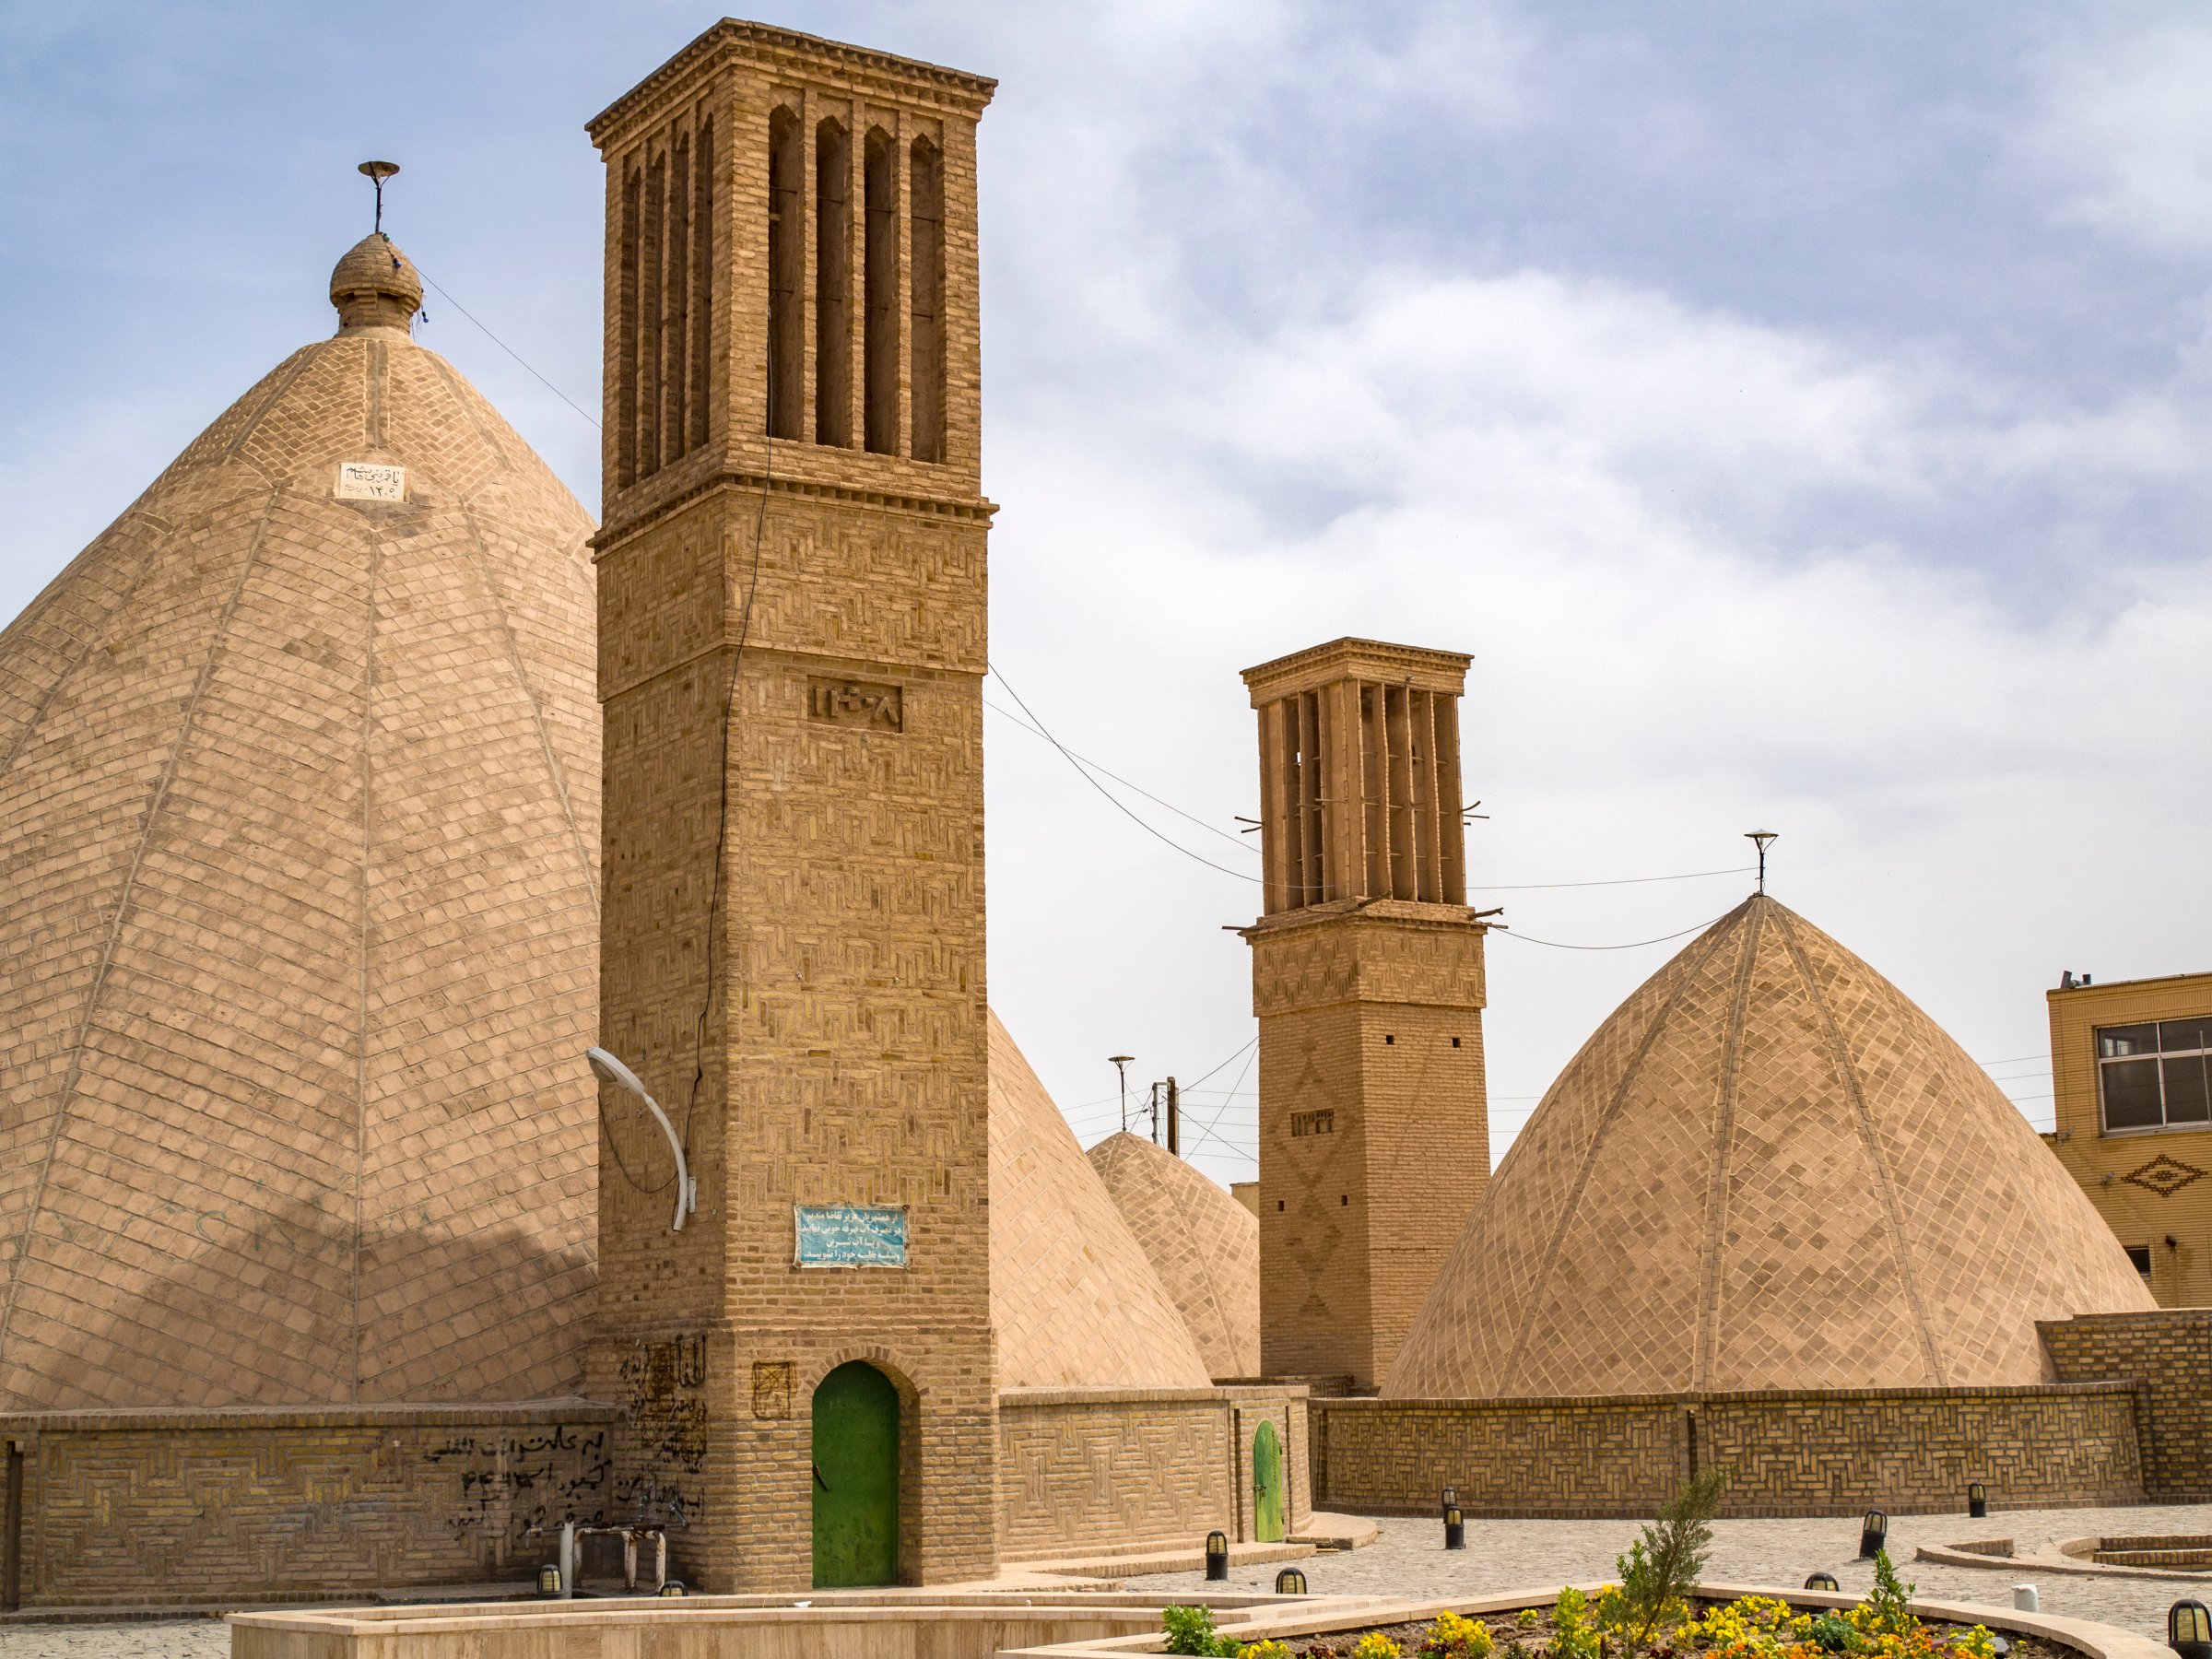 Wind towers and domed buildings in Iran.